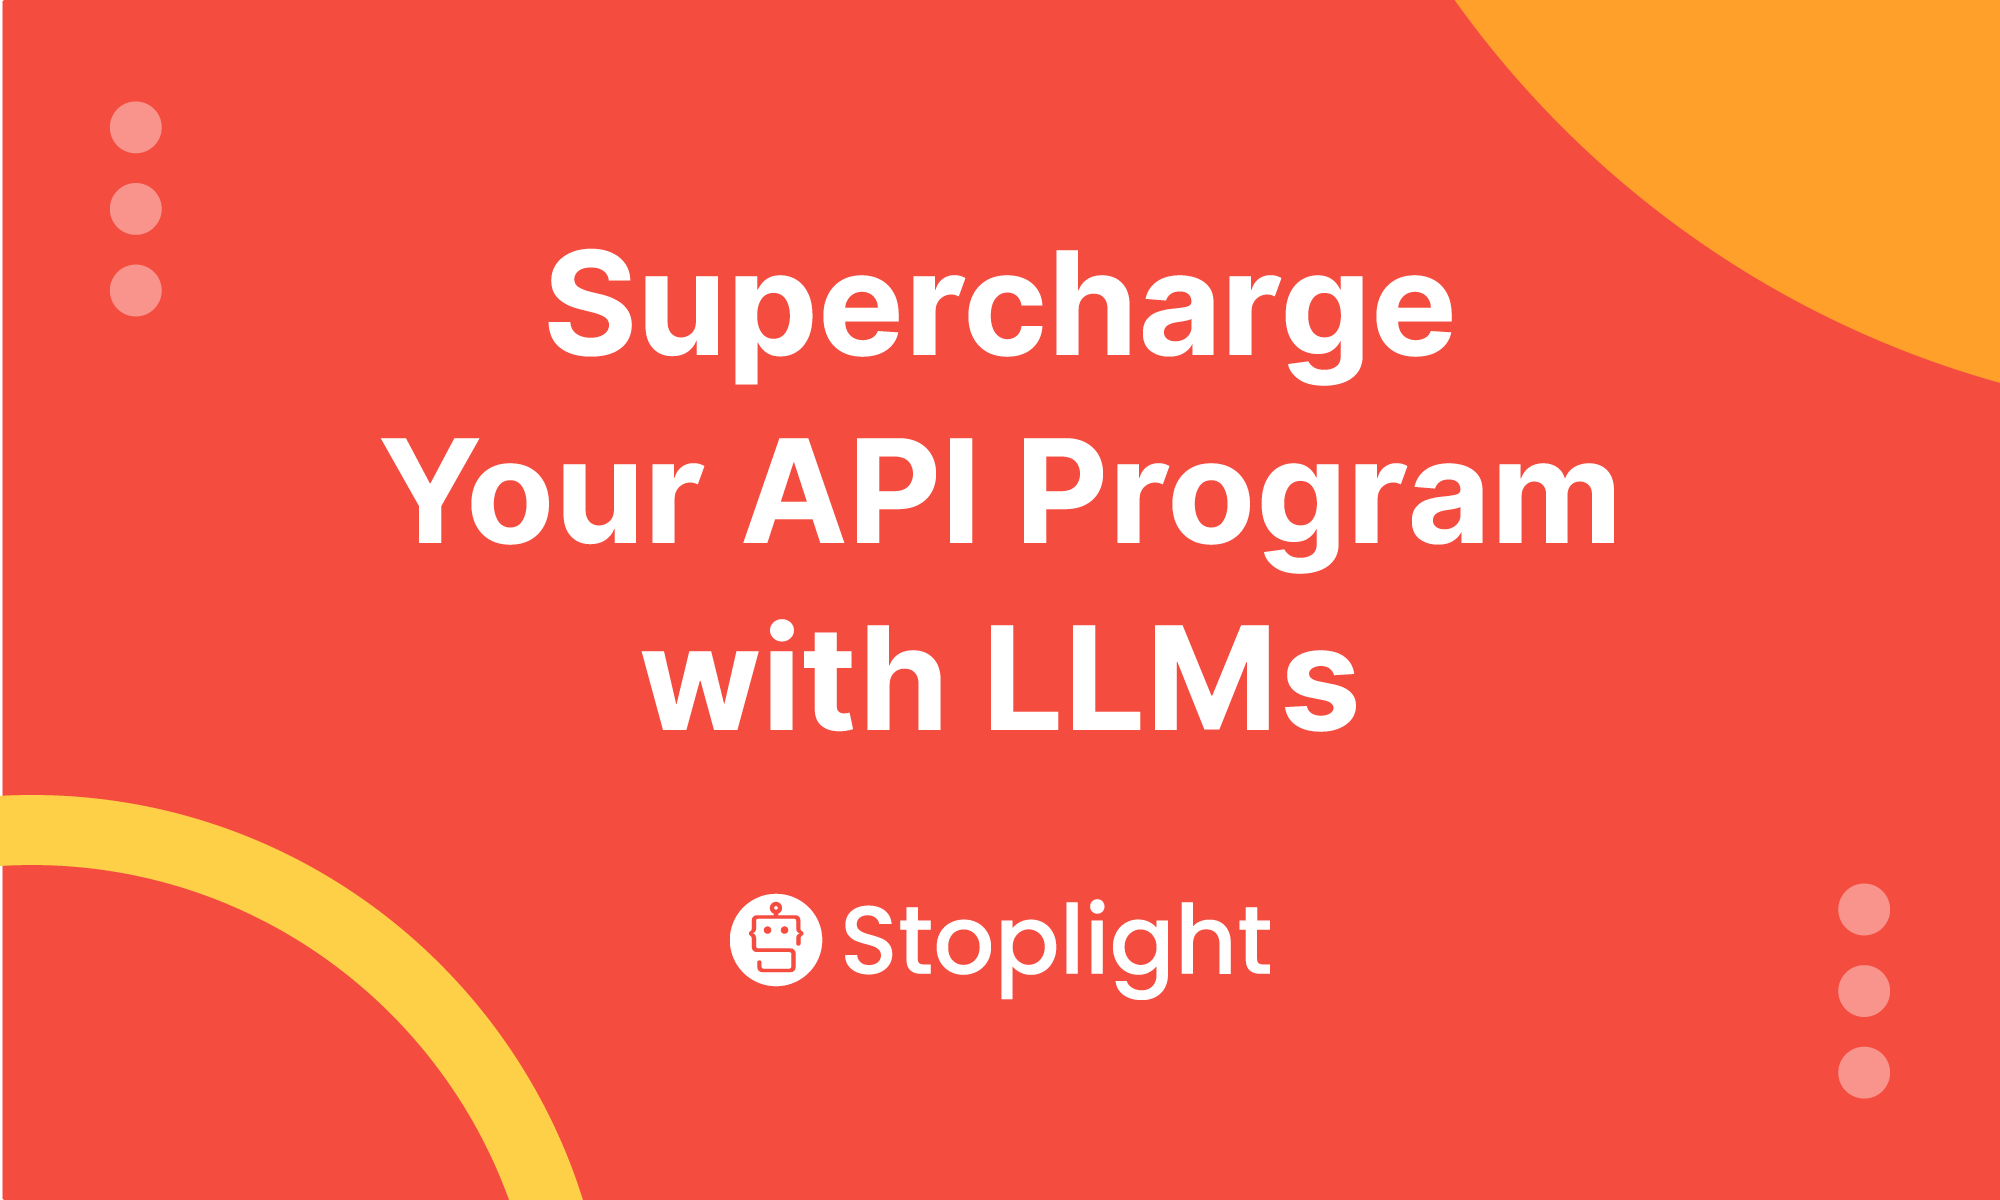 Supercharge Your API Program with LLMs